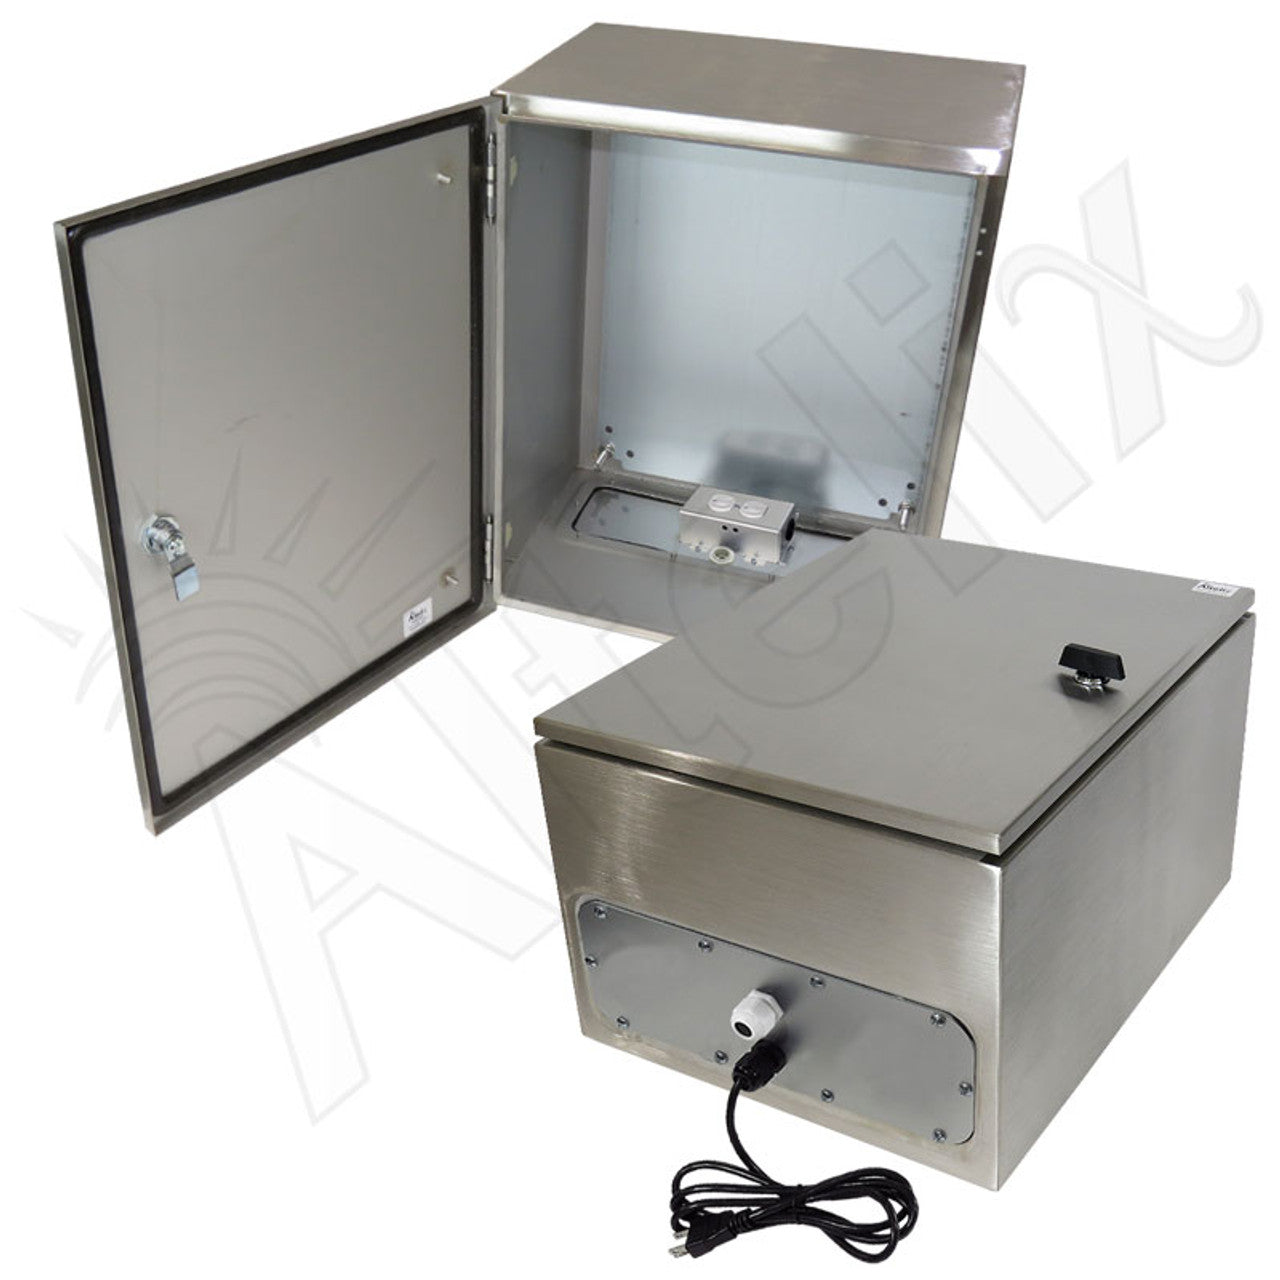 Altelix NEMA 4X Stainless Steel Weatherproof Enclosure with 120 VAC Outlets and Power Cord-3